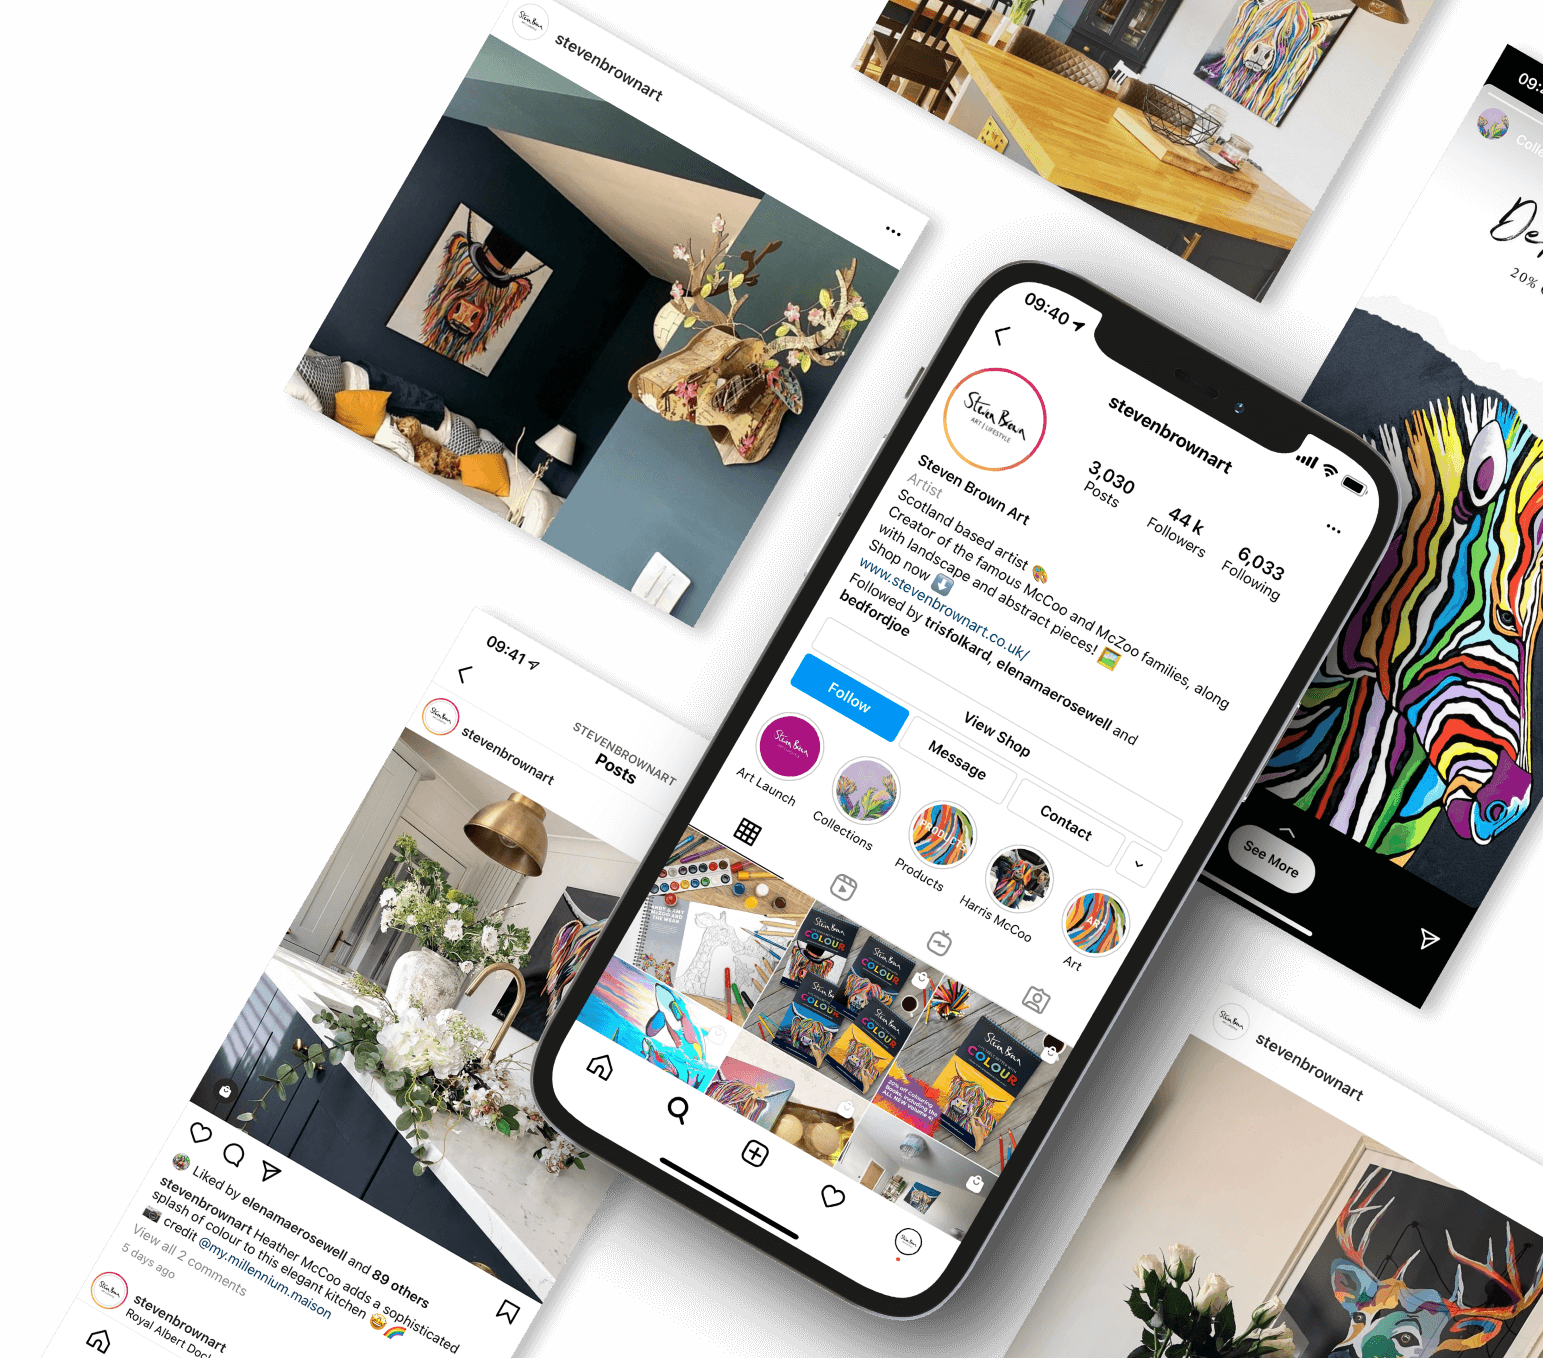 Colour image of Instagram mockups for Steven Brown Art posts. In the foreground there is an Iphone screen showing the Steven Brown Art Instagram page and in the background are pictures of social posts.